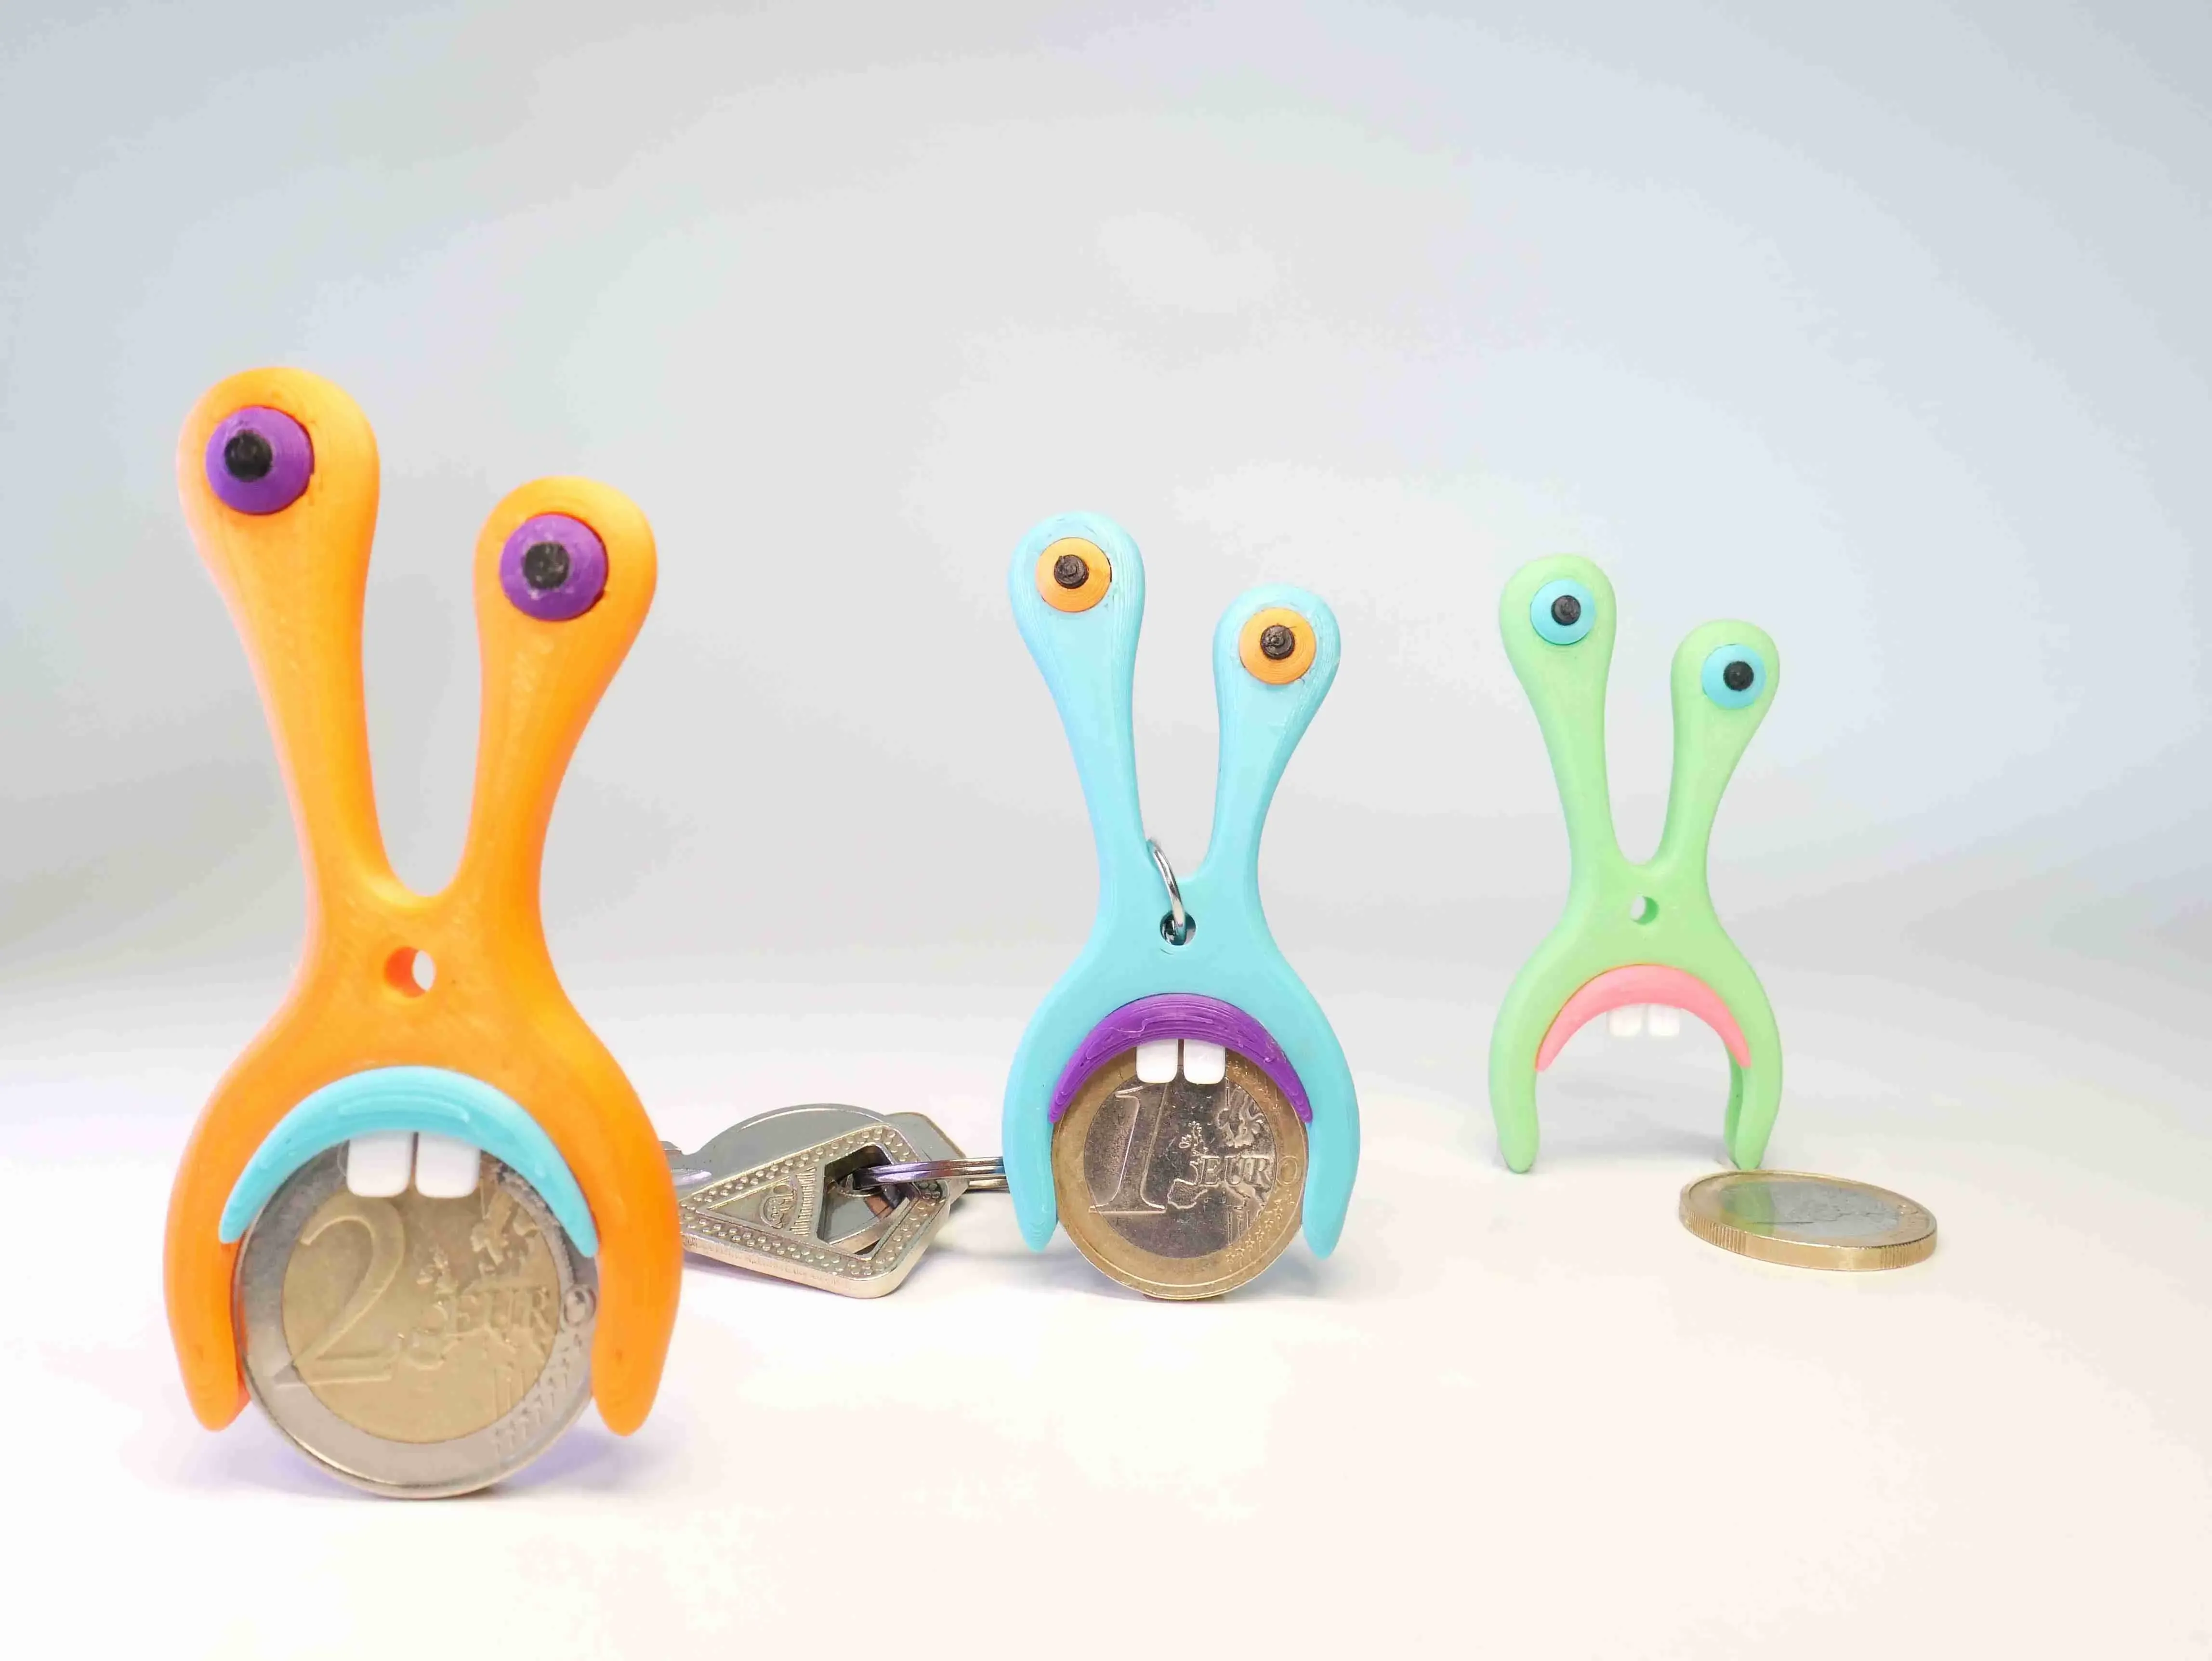 AN AMOEBA-SHAPED KEYCHAIN, SUITABLE FOR 1 AND 2 EURO COINS